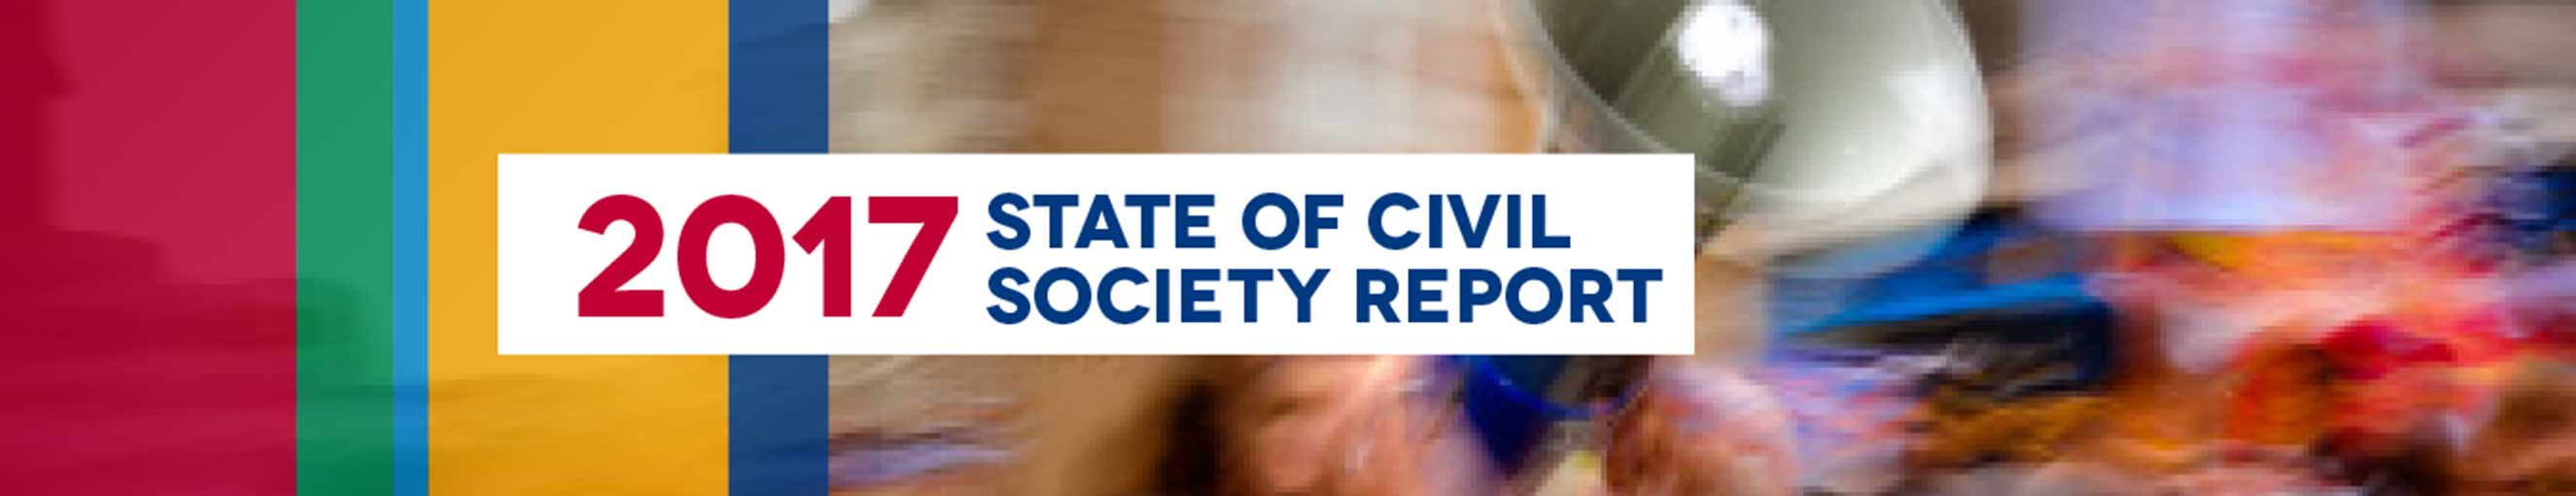 State of Civil Society Report 2017